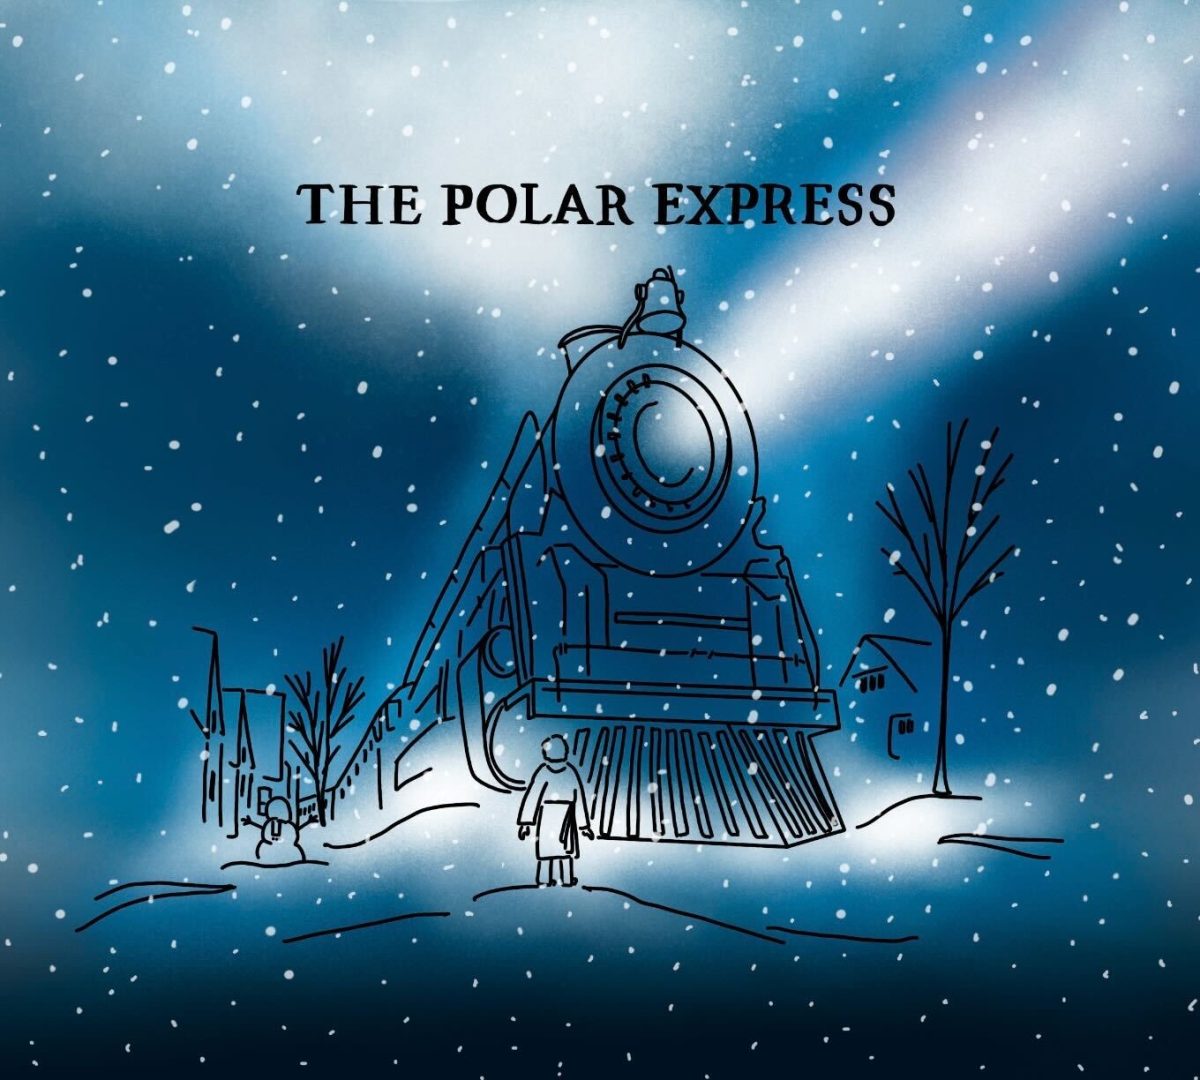 Take this test to see if you are a true fan of the classic Christmas movie The Polar Express.